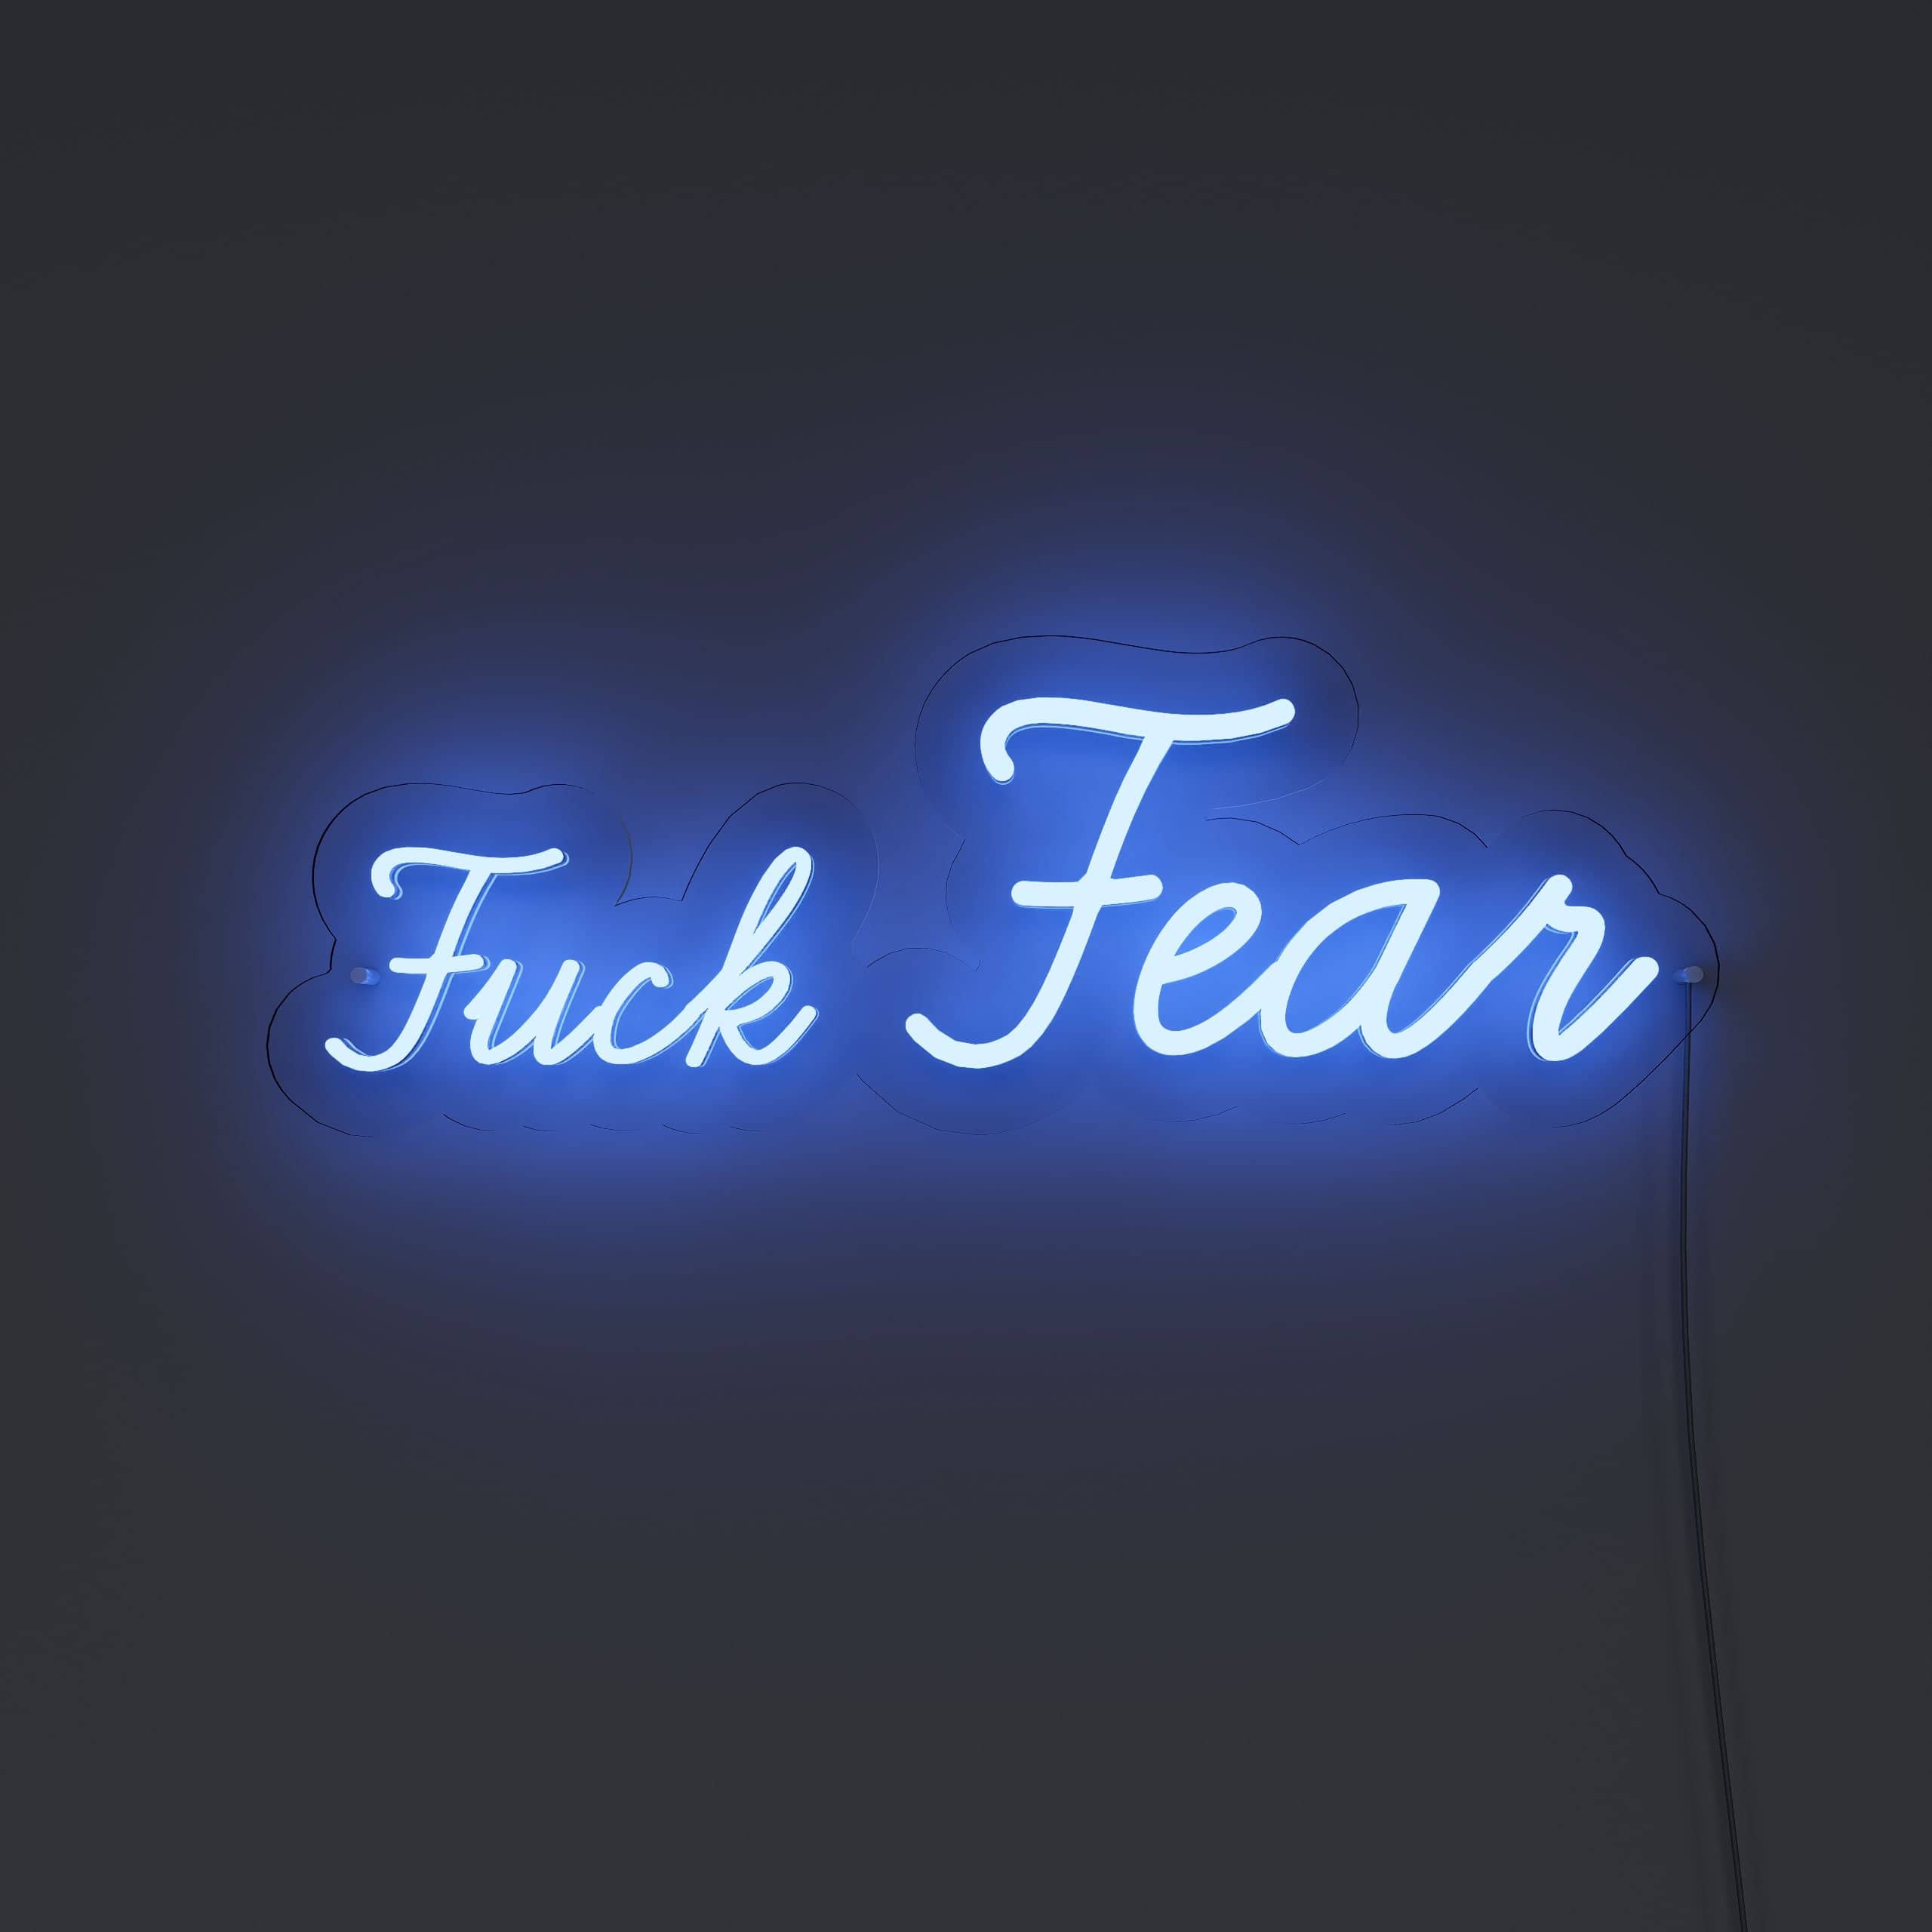 rise-above-fear's-limitations-neon-sign-lite